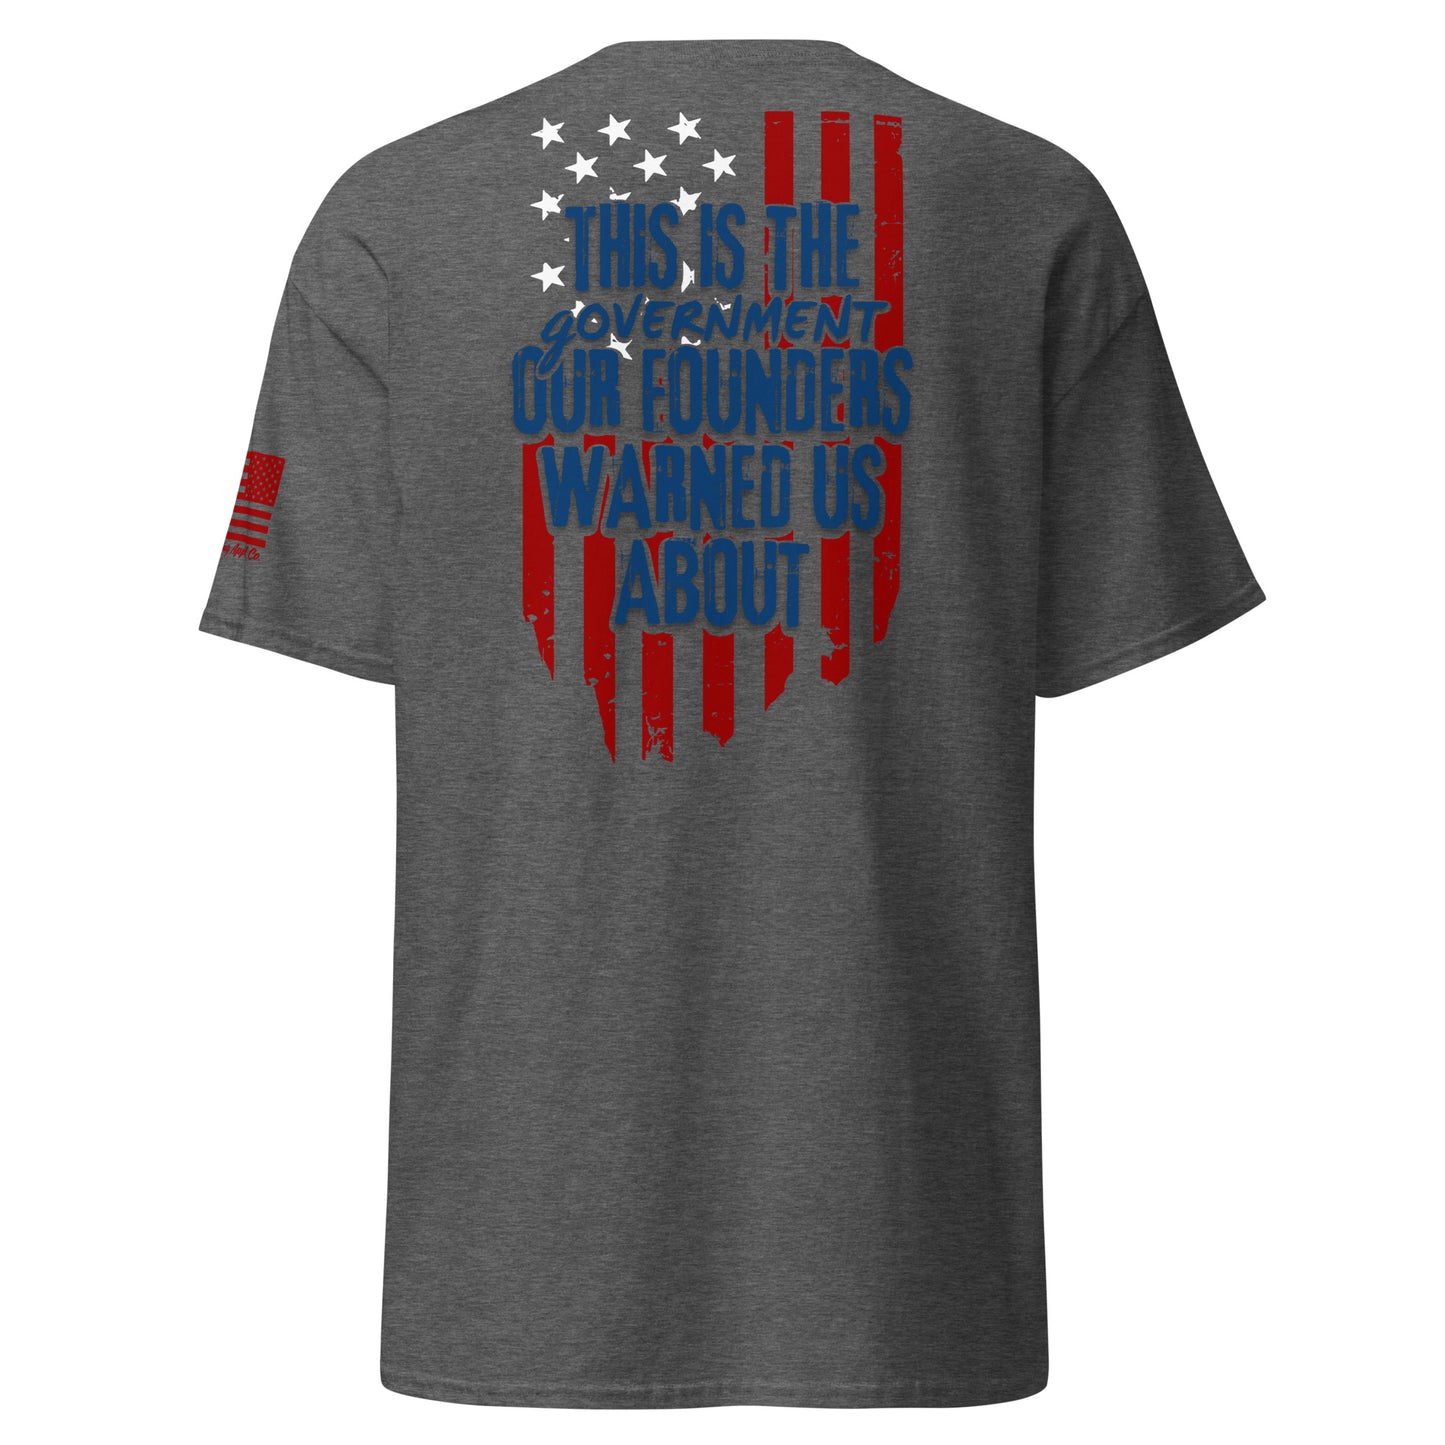 Founders Warned Us T-Shirt